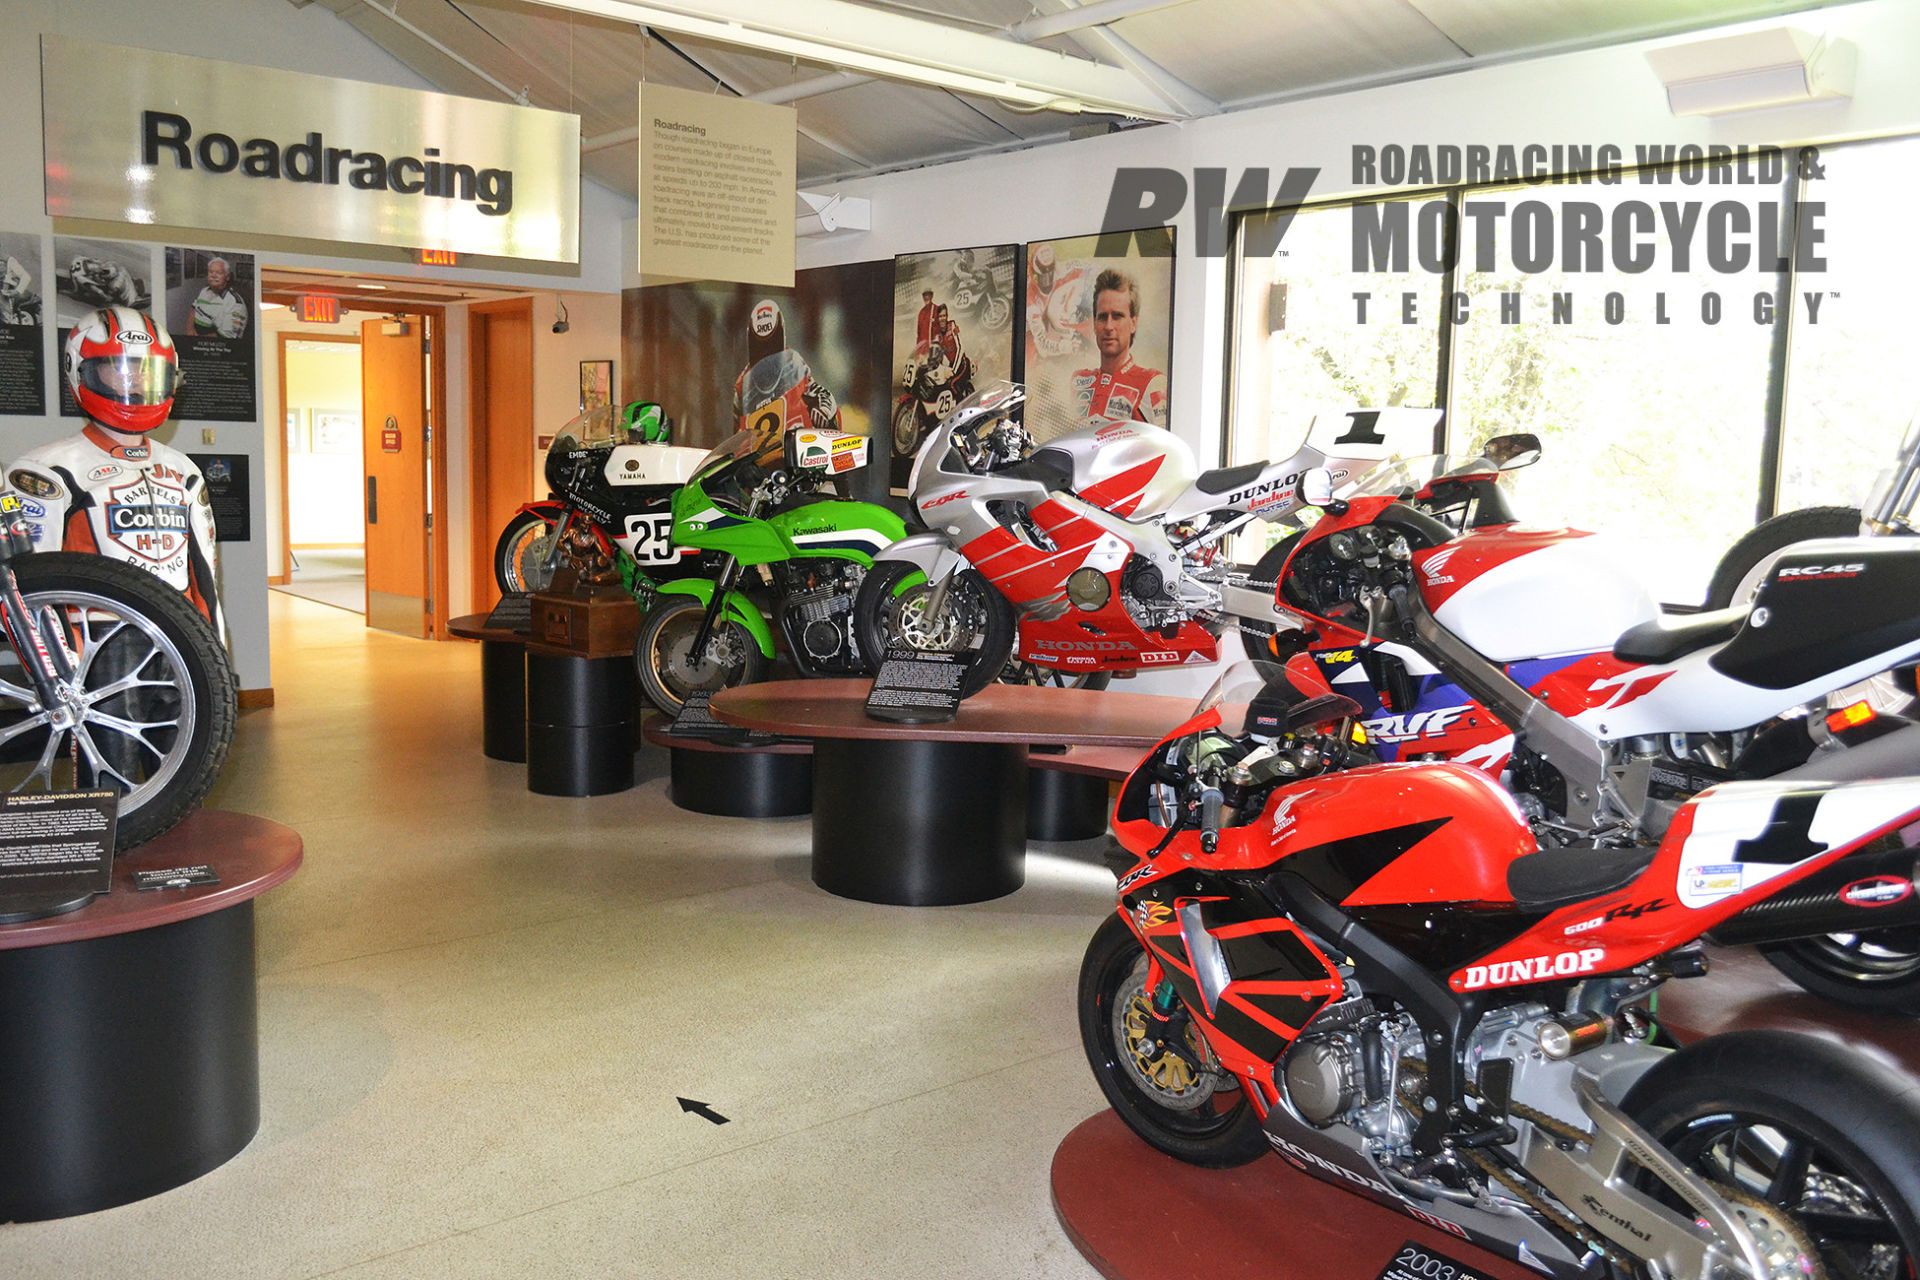 The road racing section of the AMA Motorcycle Hall of Fame Museum features winning machines including Miguel Duhamel’s #1 2004-2005 AMA Pro Formula Xtreme Championship-winning Honda CBR600R; Nicky Hayden’s #1 1999 AMA Supersport Championship-winning Honda CBR600F4; Wayne Rainey’s 1983 AMA Superbike Championship-winning Kawasaki GPz750; and Don Emde’s #25 1972 Daytona 200-winning Yamaha TR3 350cc air-cooled twin-cylinder two-stroke. Photo by David Swarts.